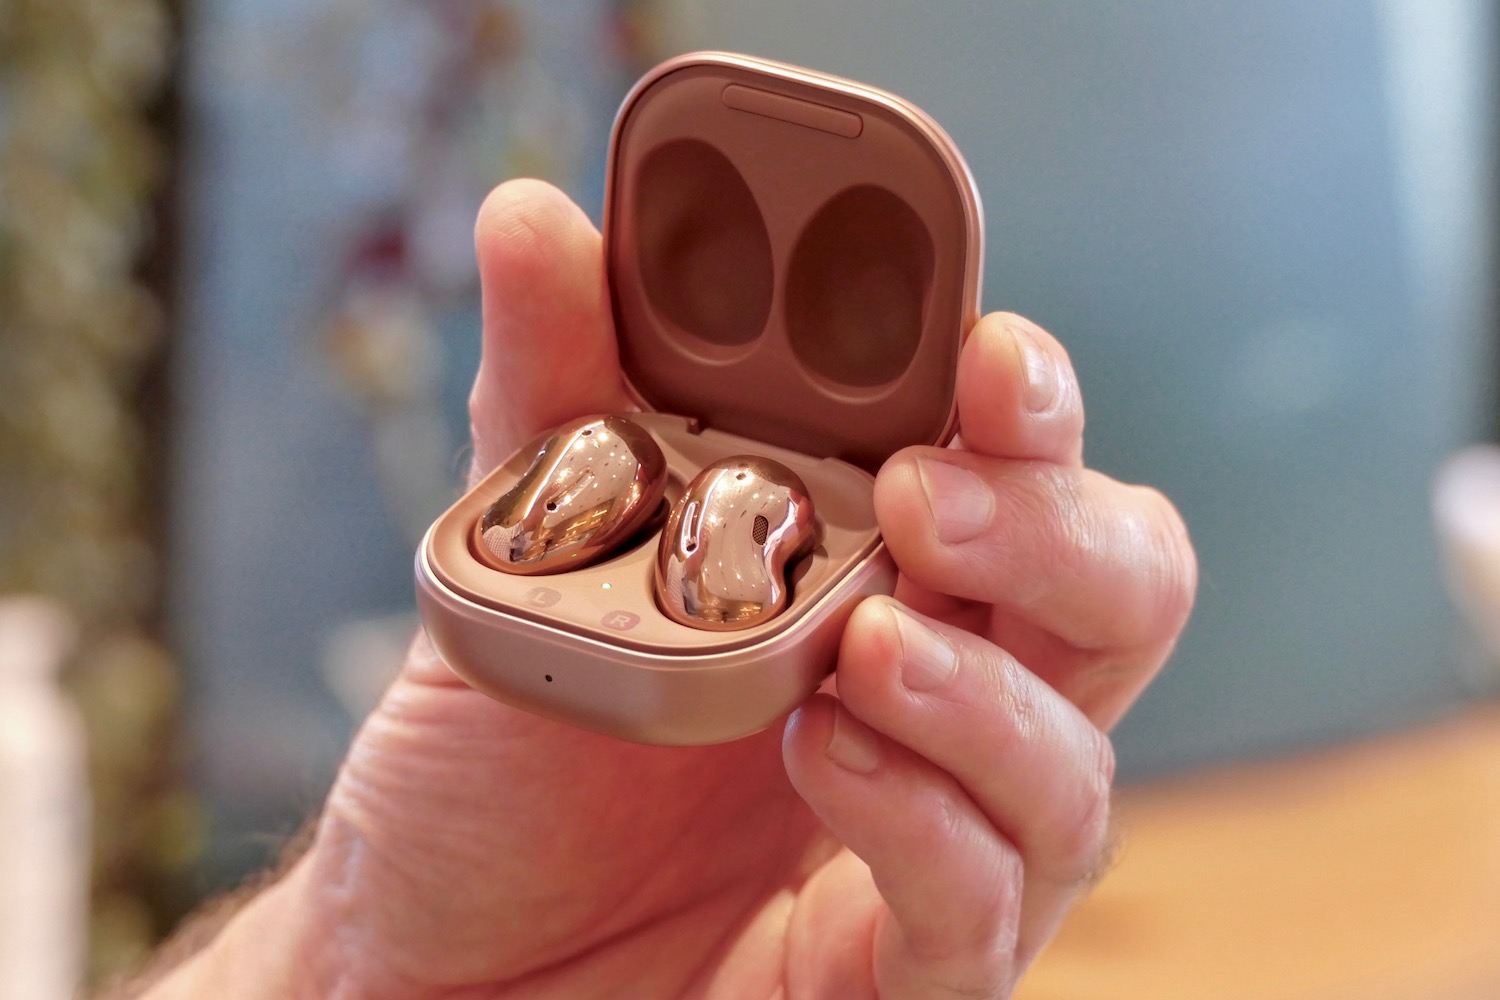 The Samsung Galaxy Buds Live inside their charging case.